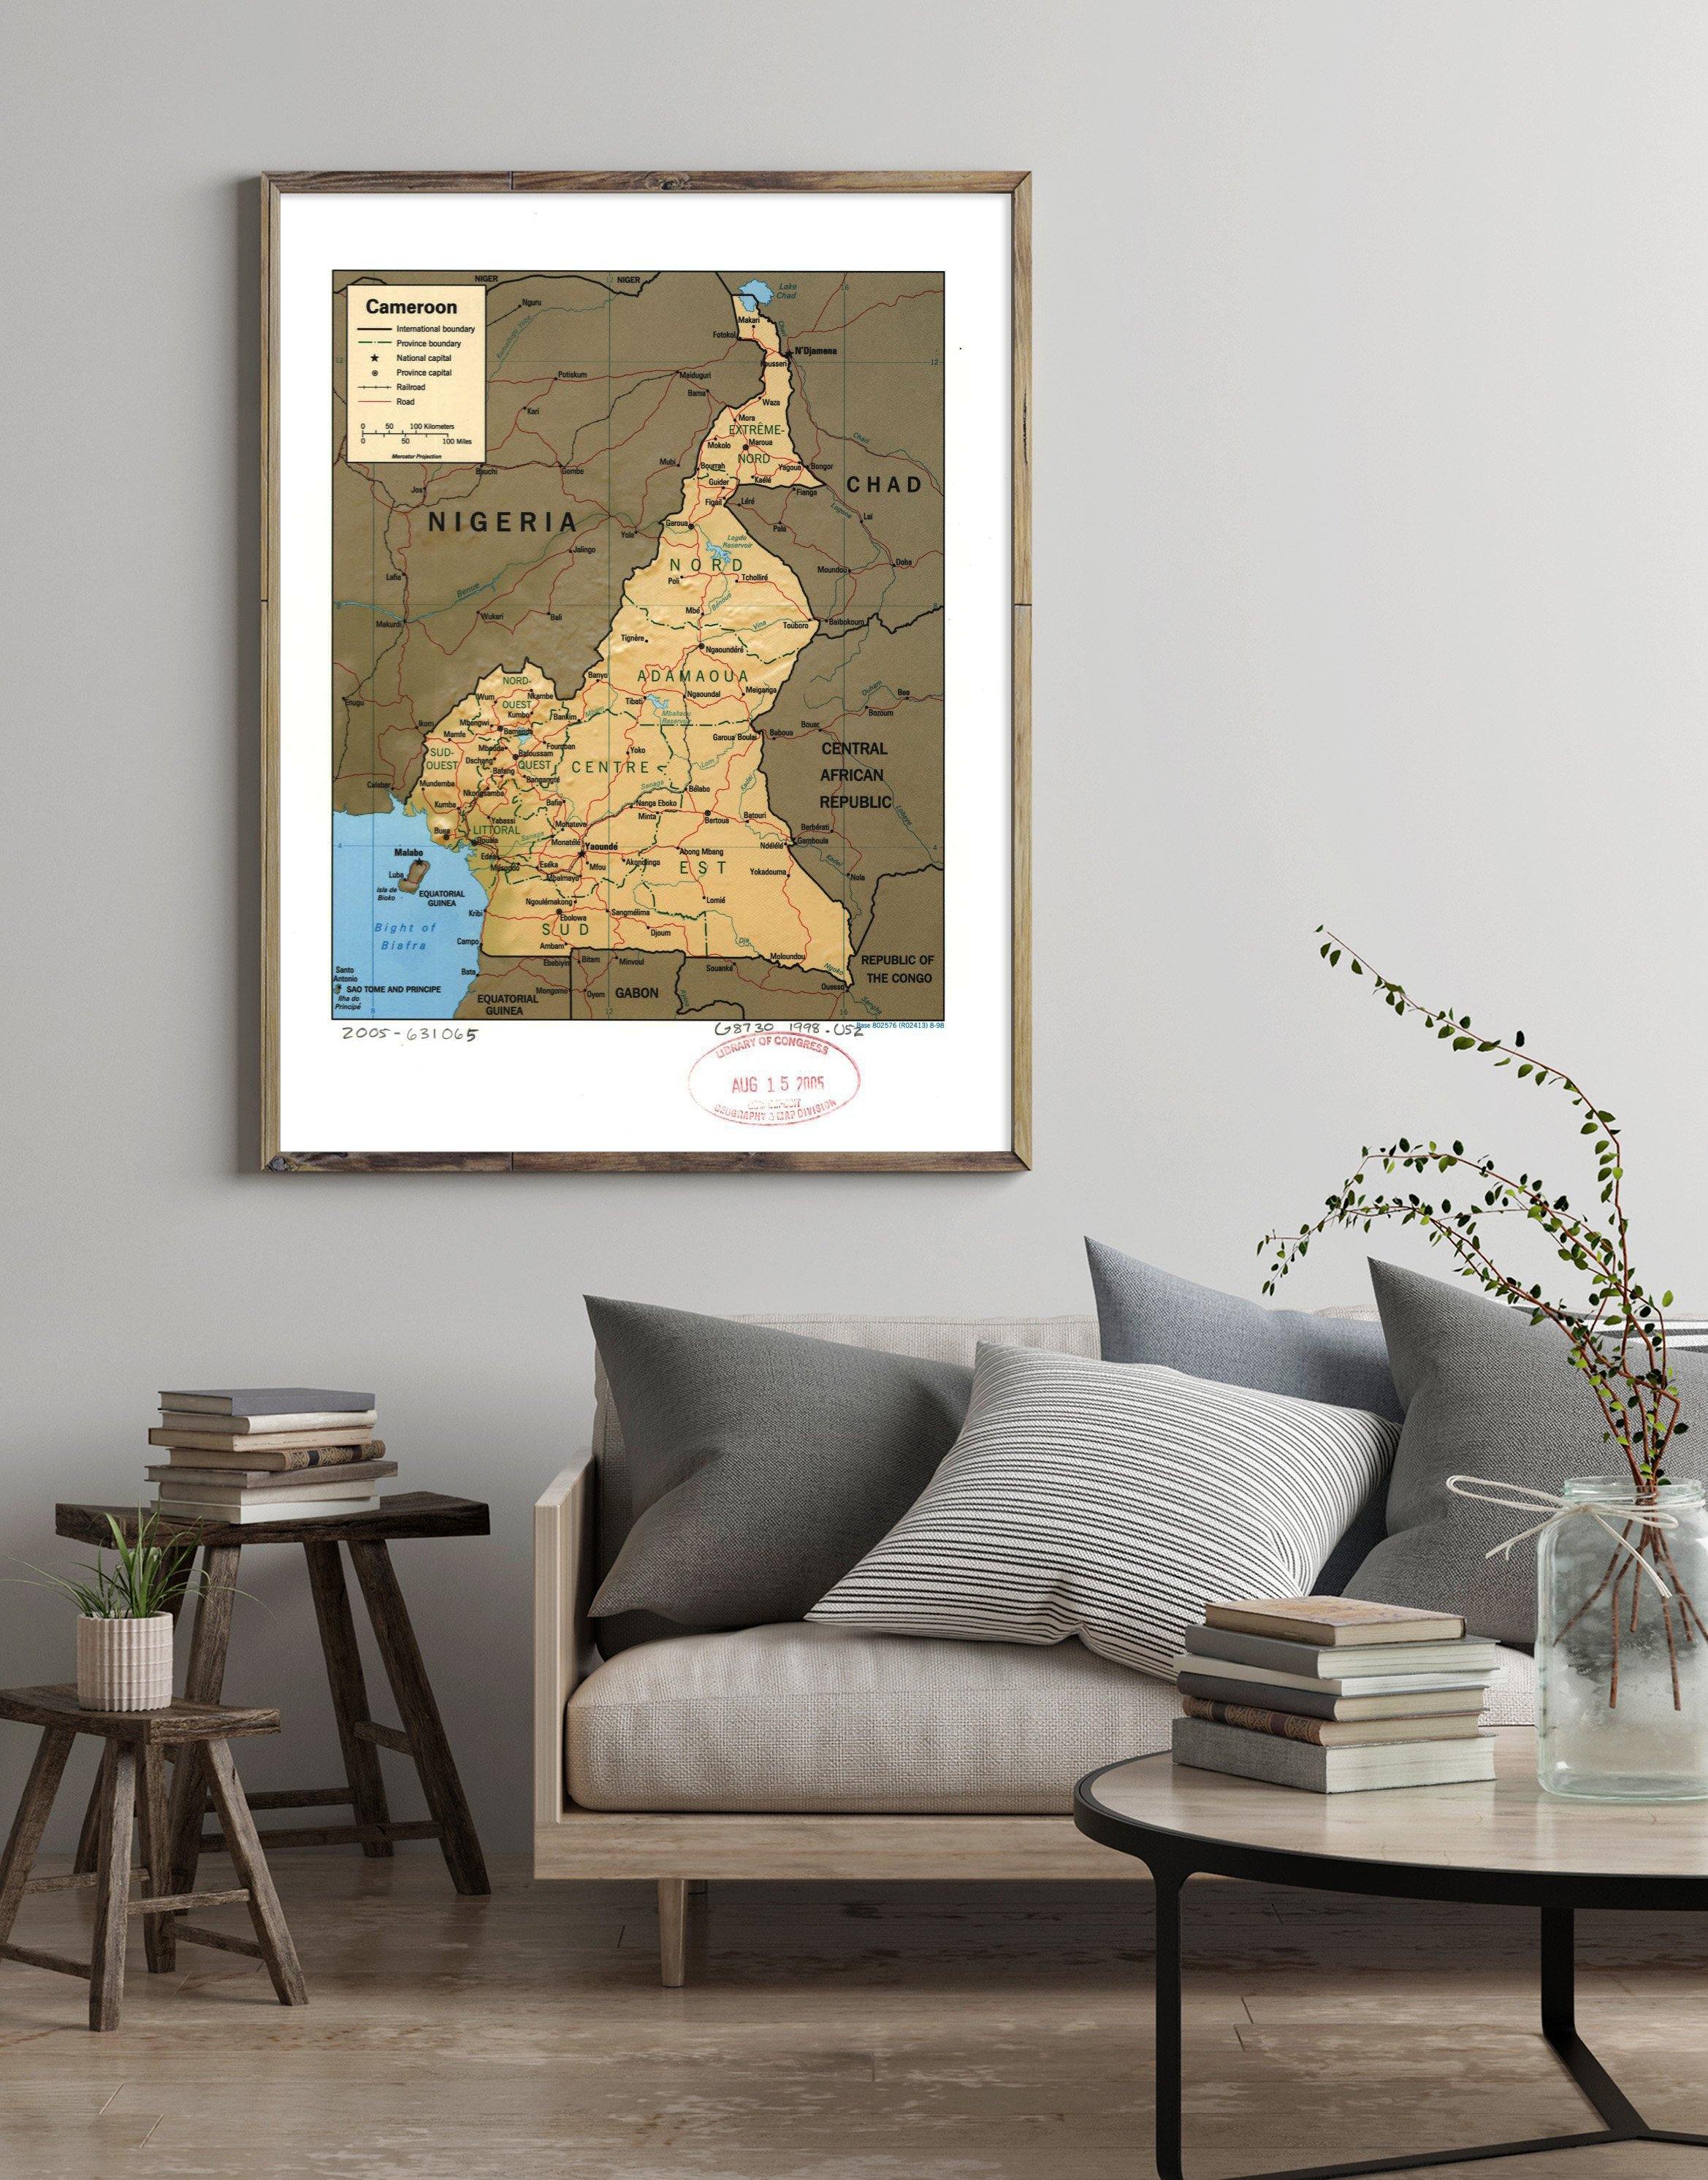 1998 Map| Cameroon| Cameroon Map Size: 18 inches x 24 inches |Fits 18x - New York Map Company